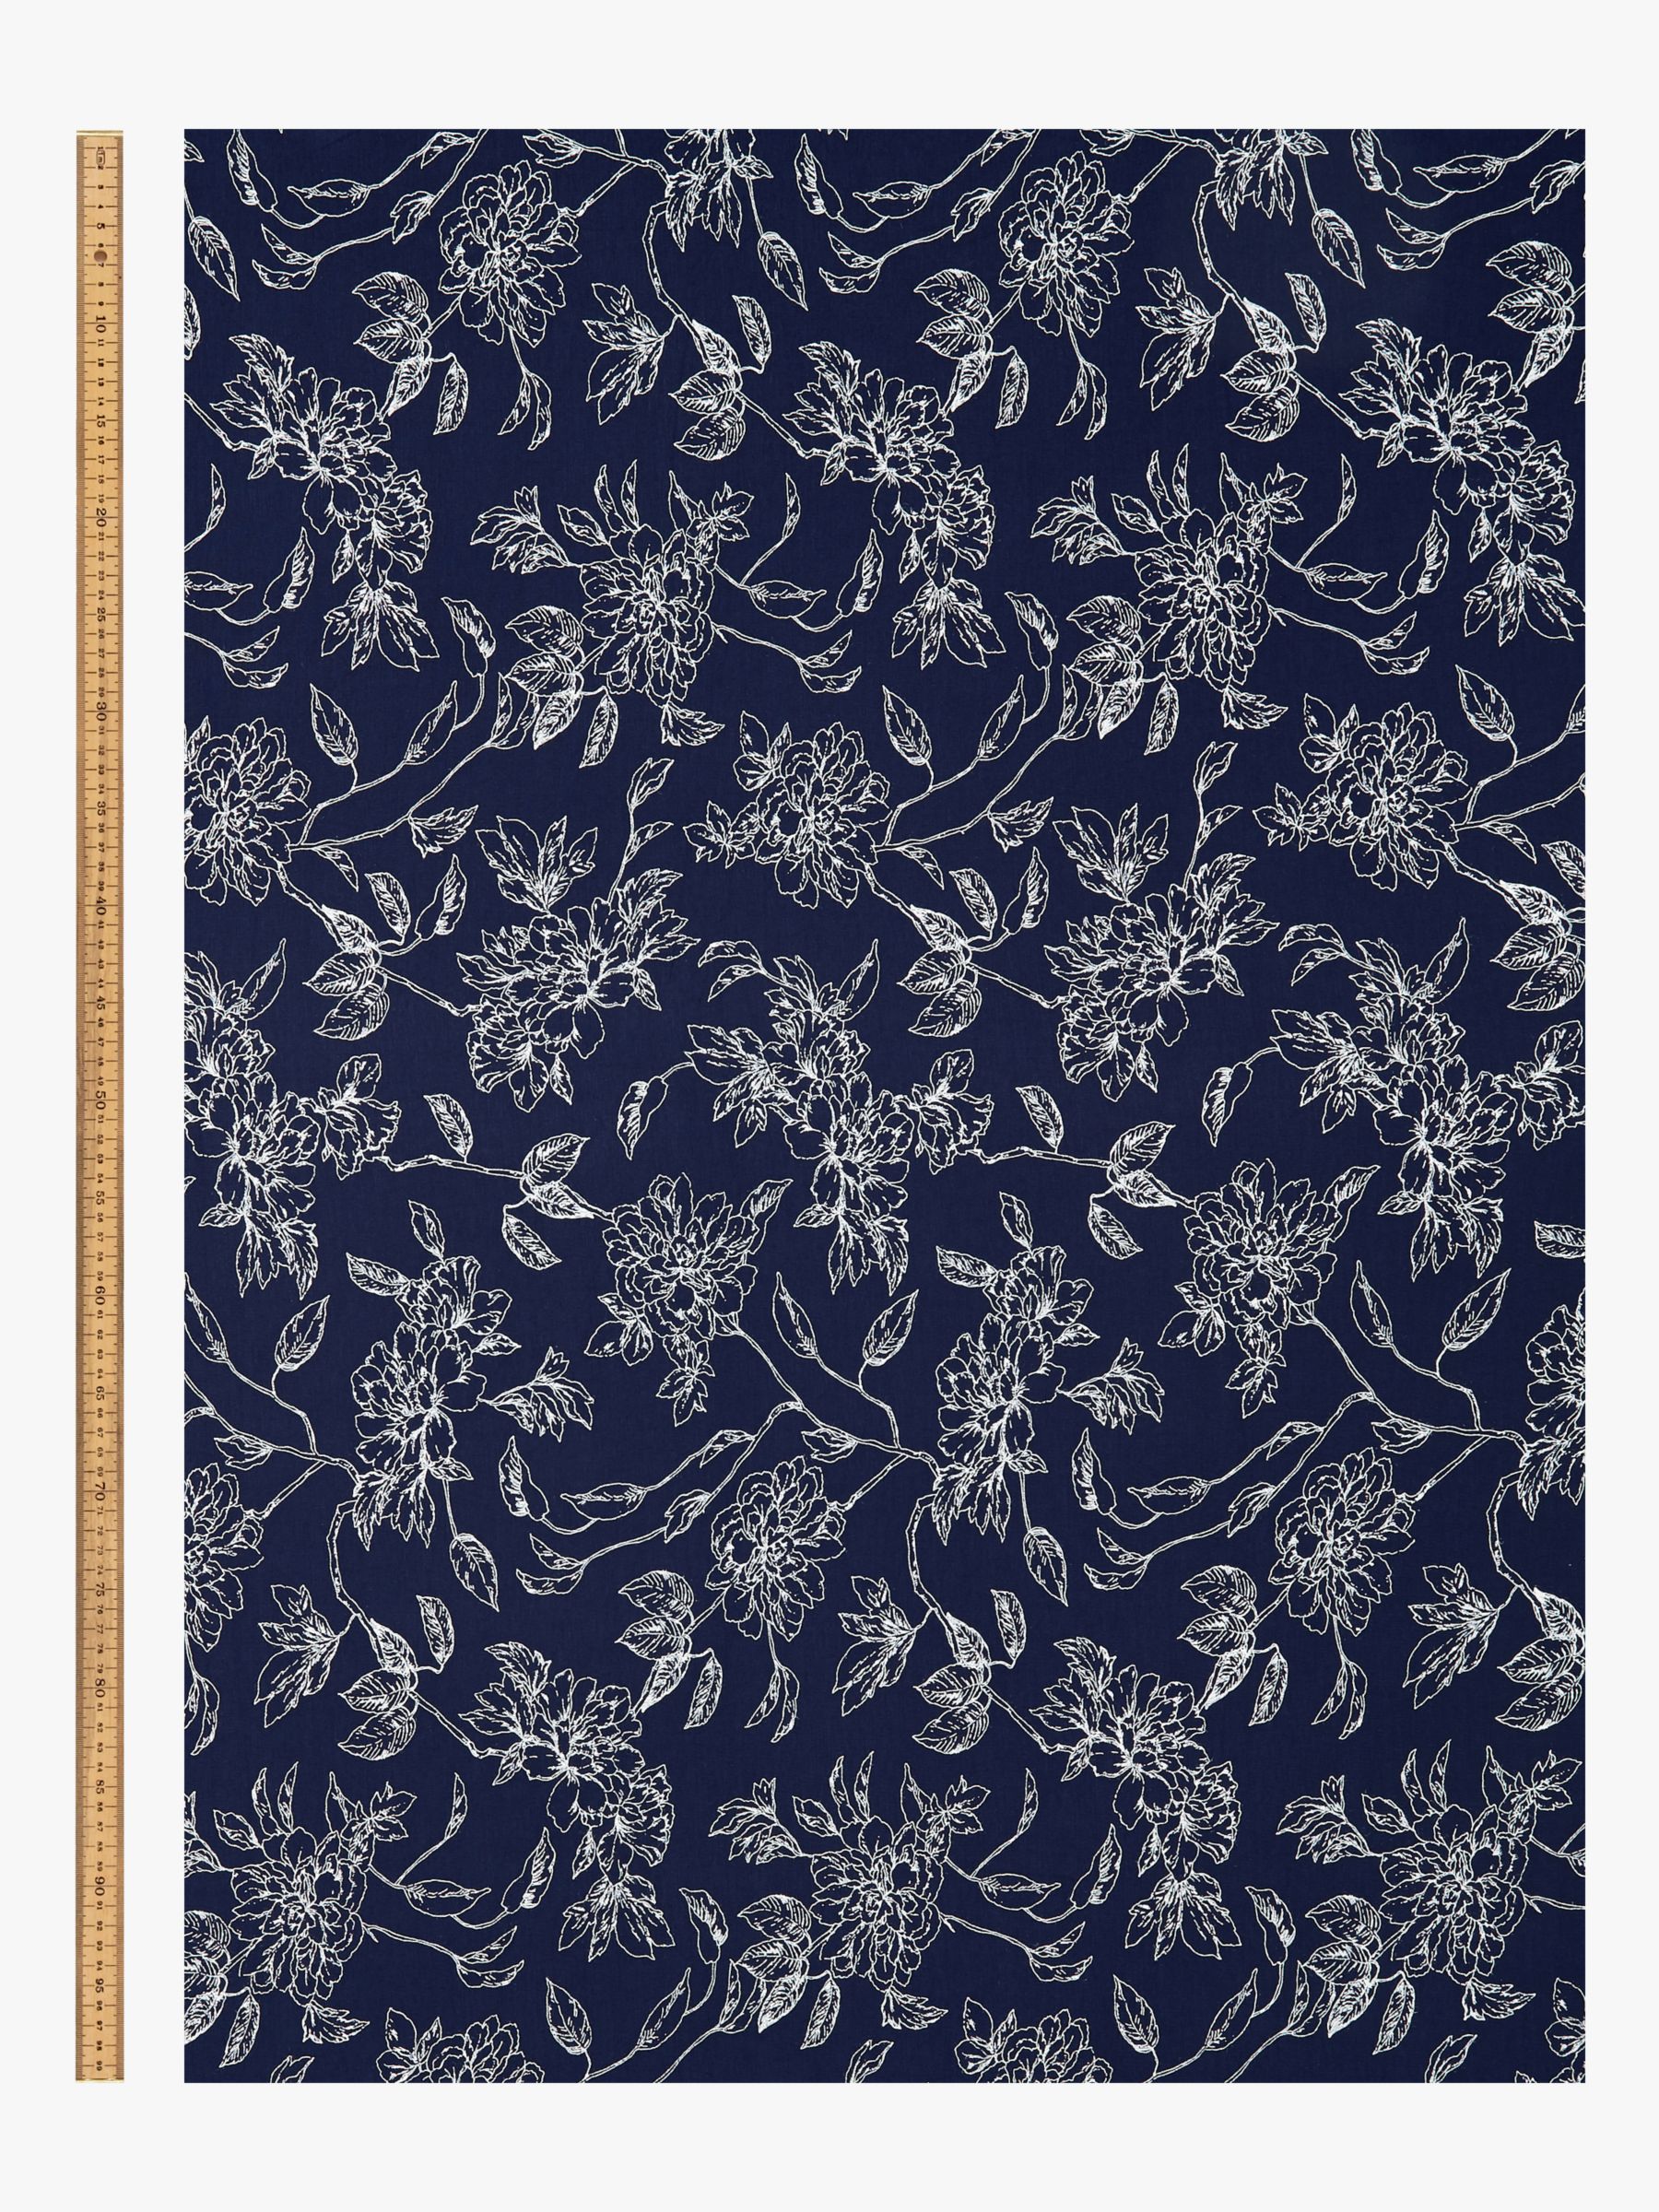 Montreux Fabrics Exclusive White Line Drawn Floral Print Fabric, Navy